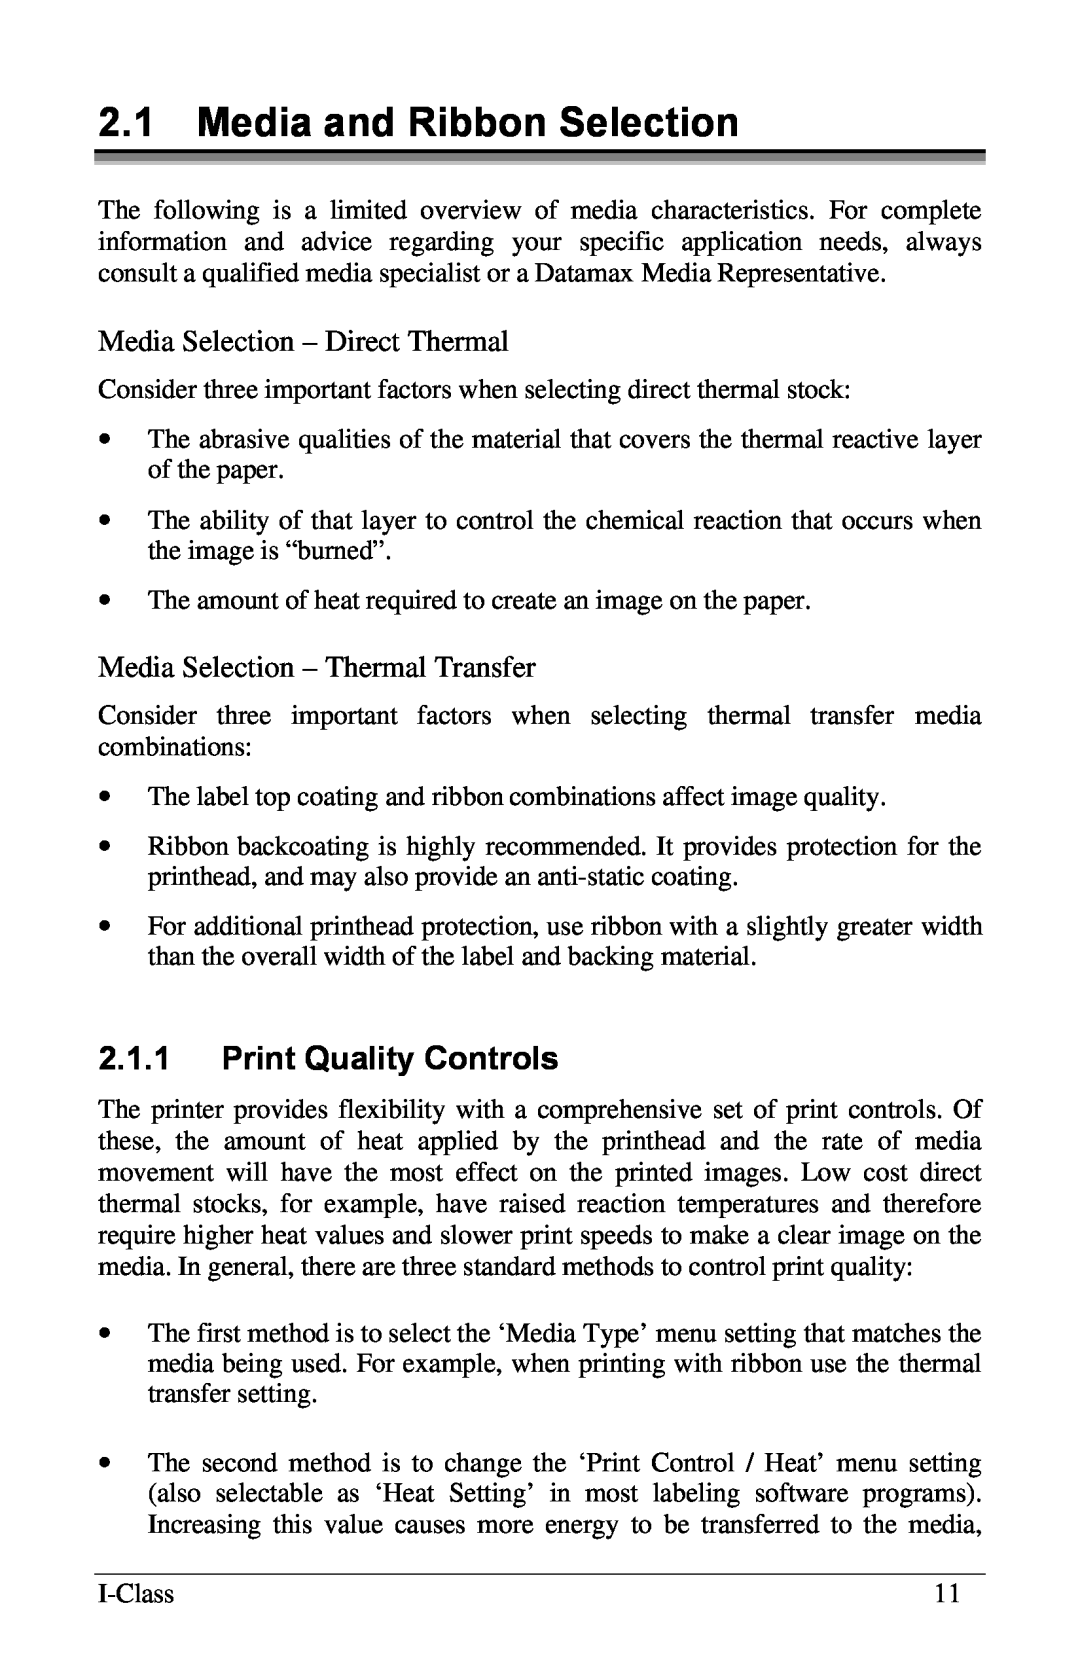 Xerox I Class manual 2.1Media and Ribbon Selection, 2.1.1Print Quality Controls, Media Selection – Direct Thermal 